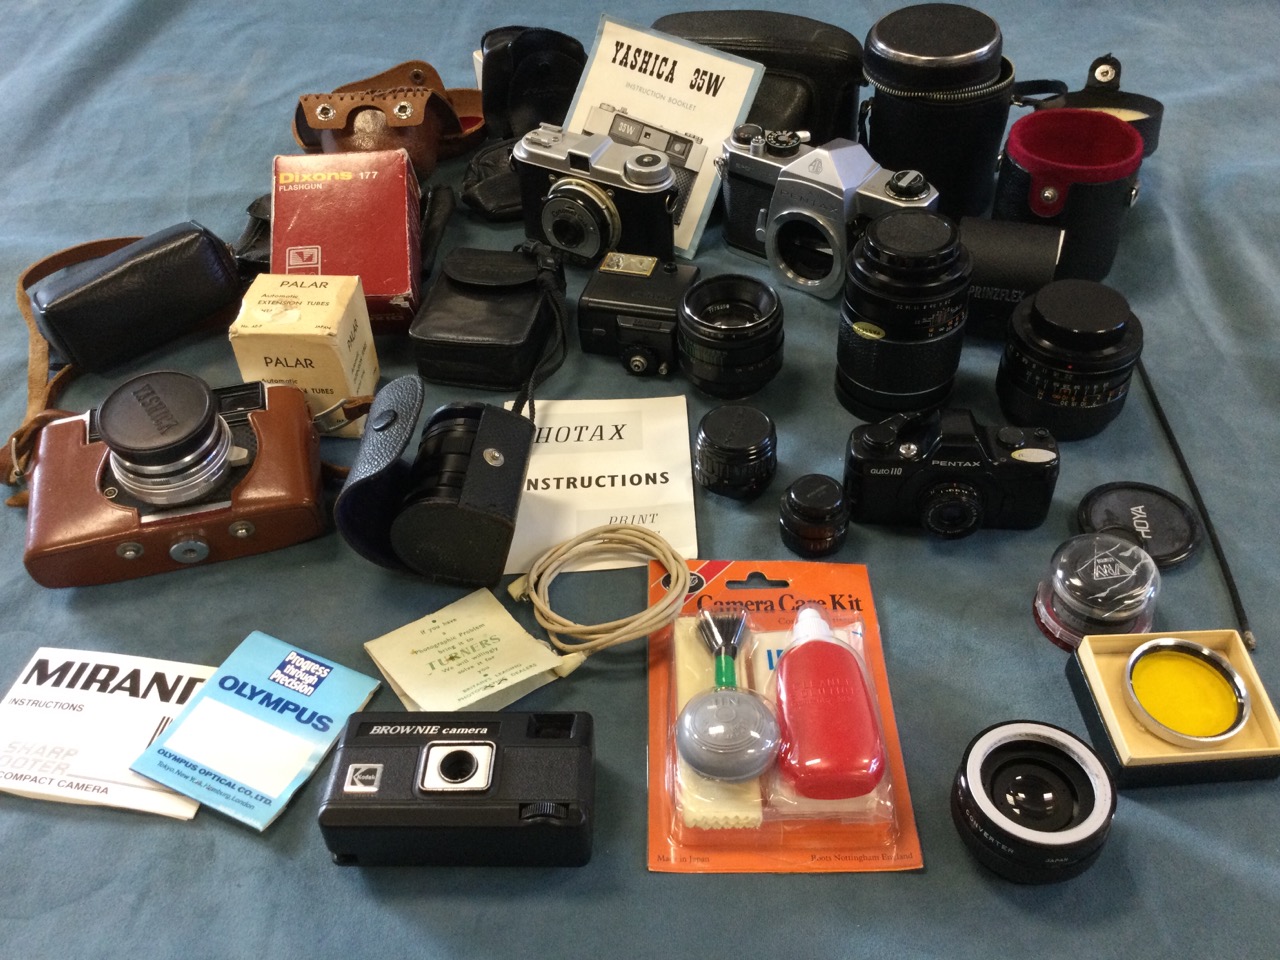 Miscellaneous cameras & photographic equipment including a leather cased Pentax, lenses, flash